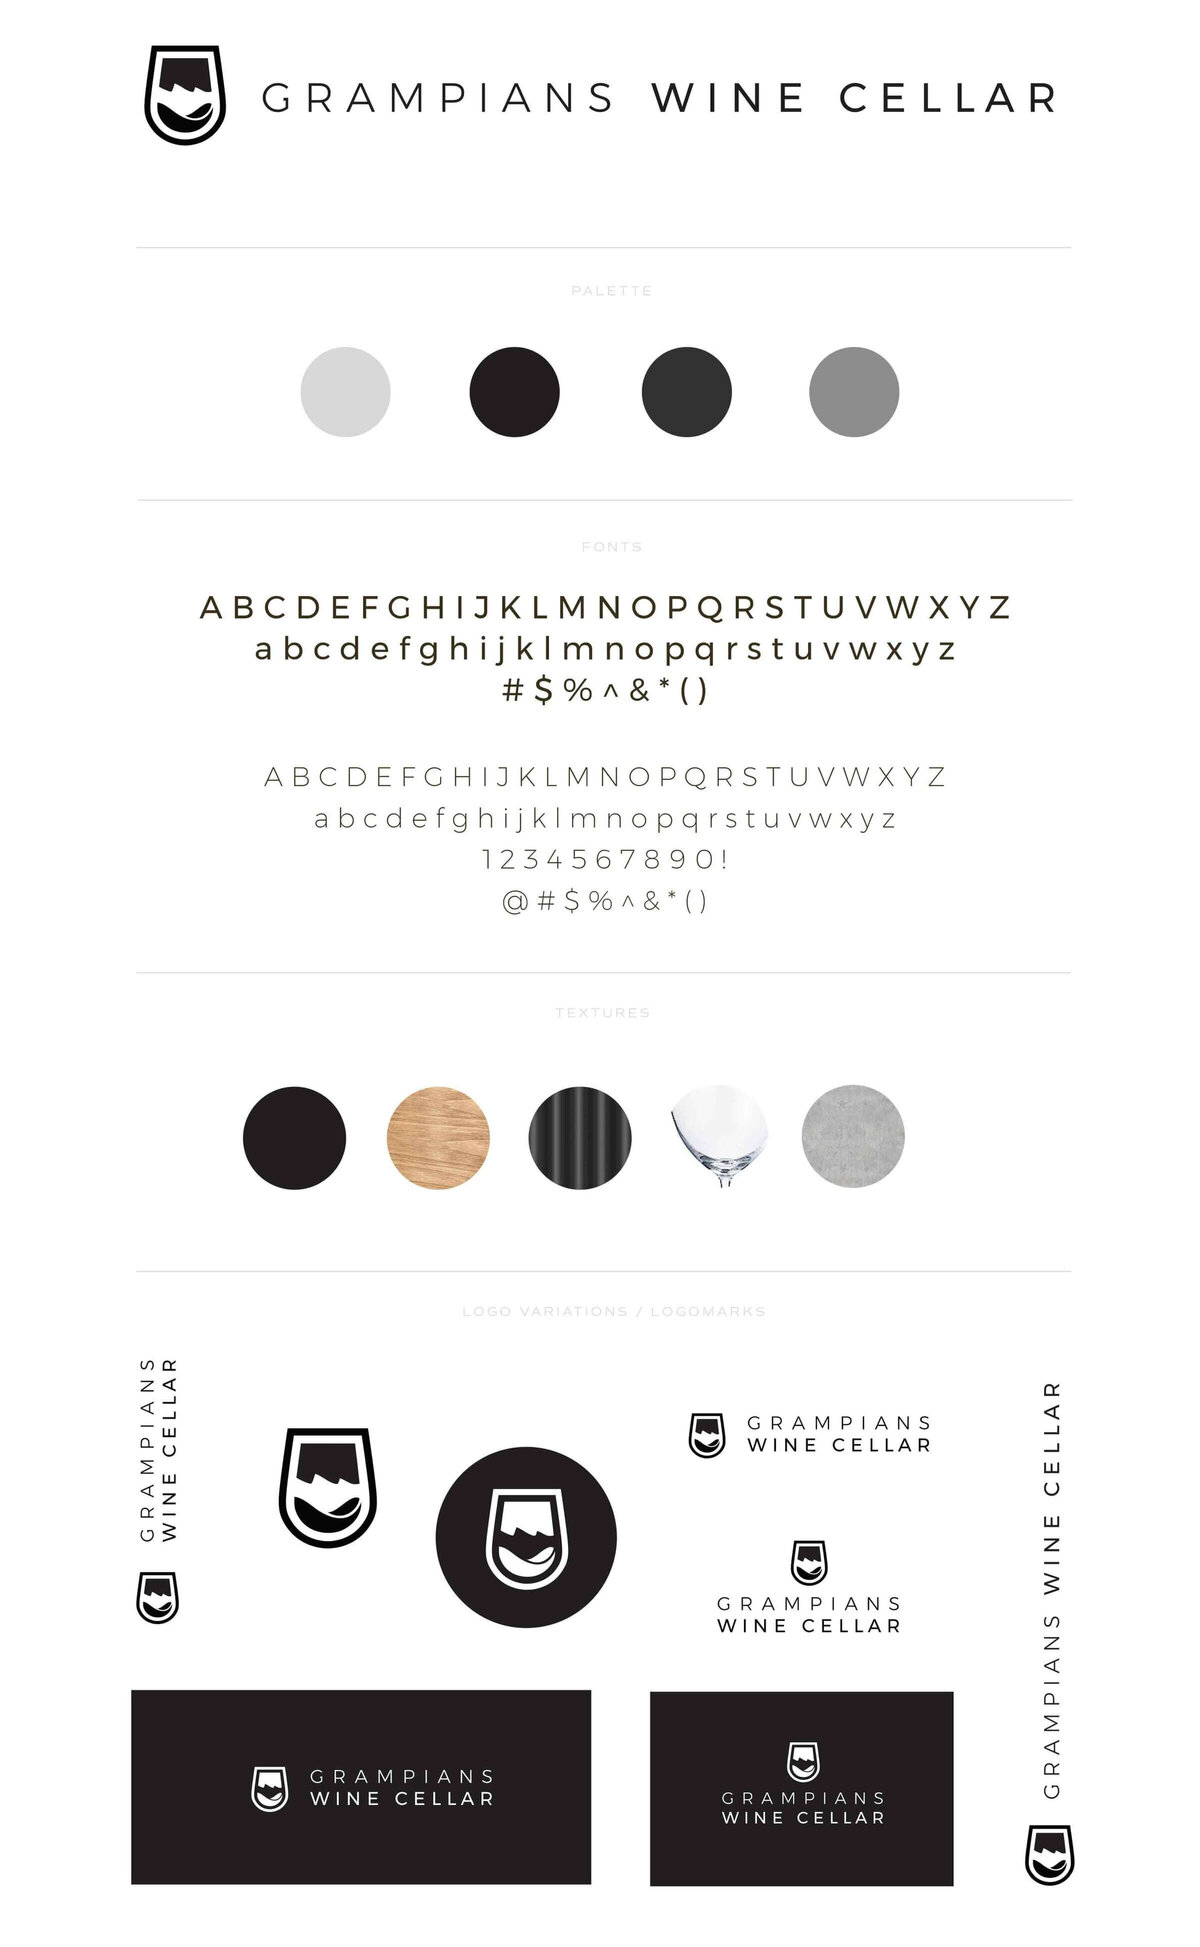 Grampians wine Cellar brand guidelines black and white colour palette, simple fonts, textures,  and logo variations